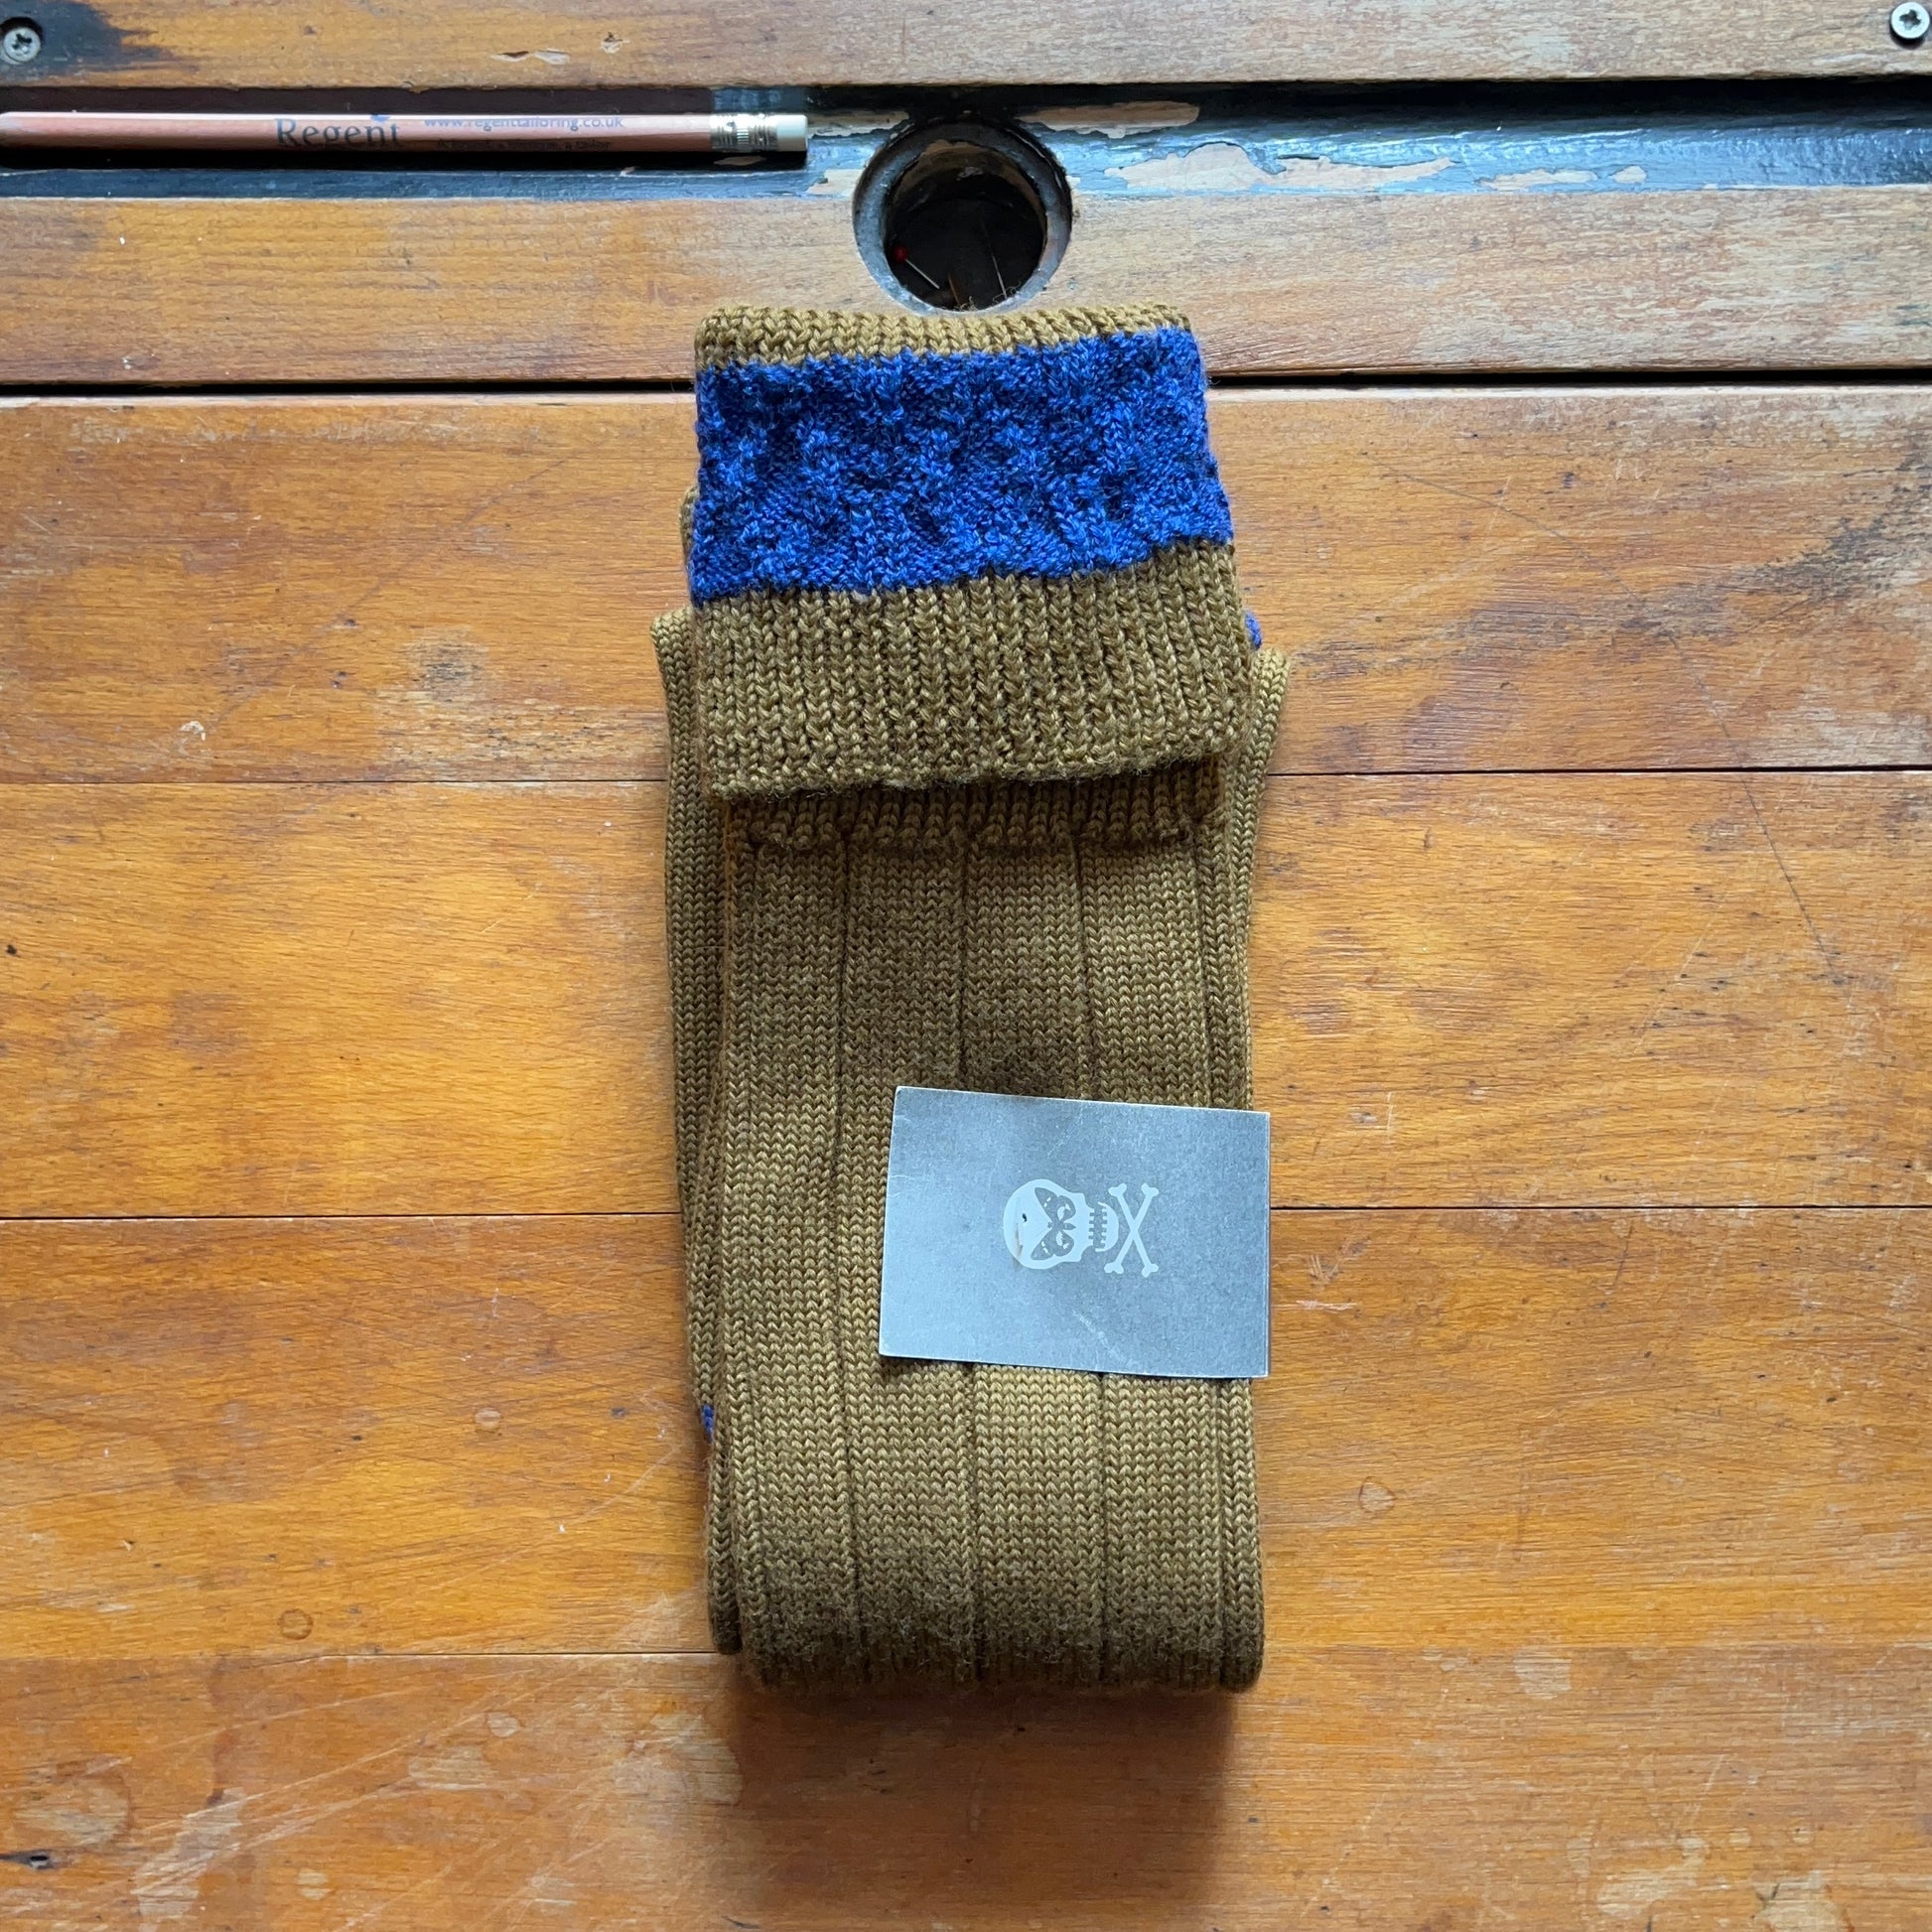 Khaki boot sock with contrasting blue cuff